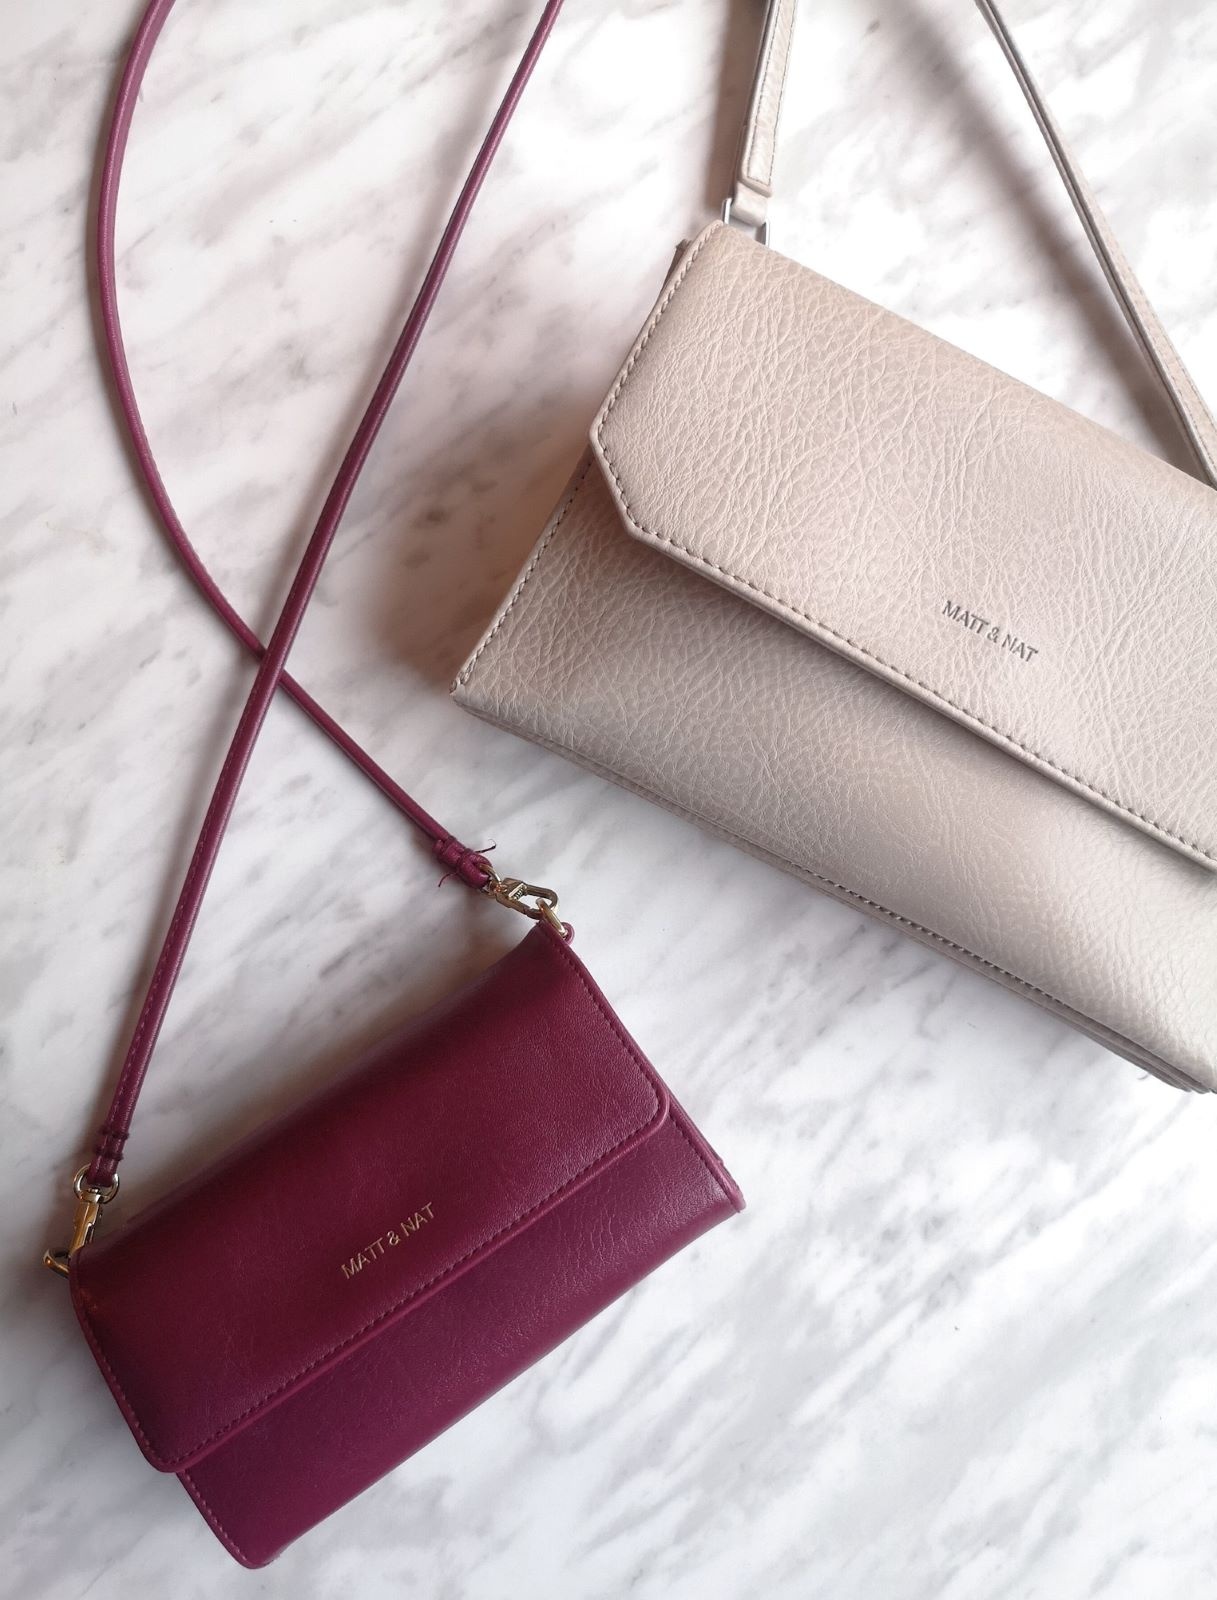 how to choose a handbag for everyday use two crossbody bags